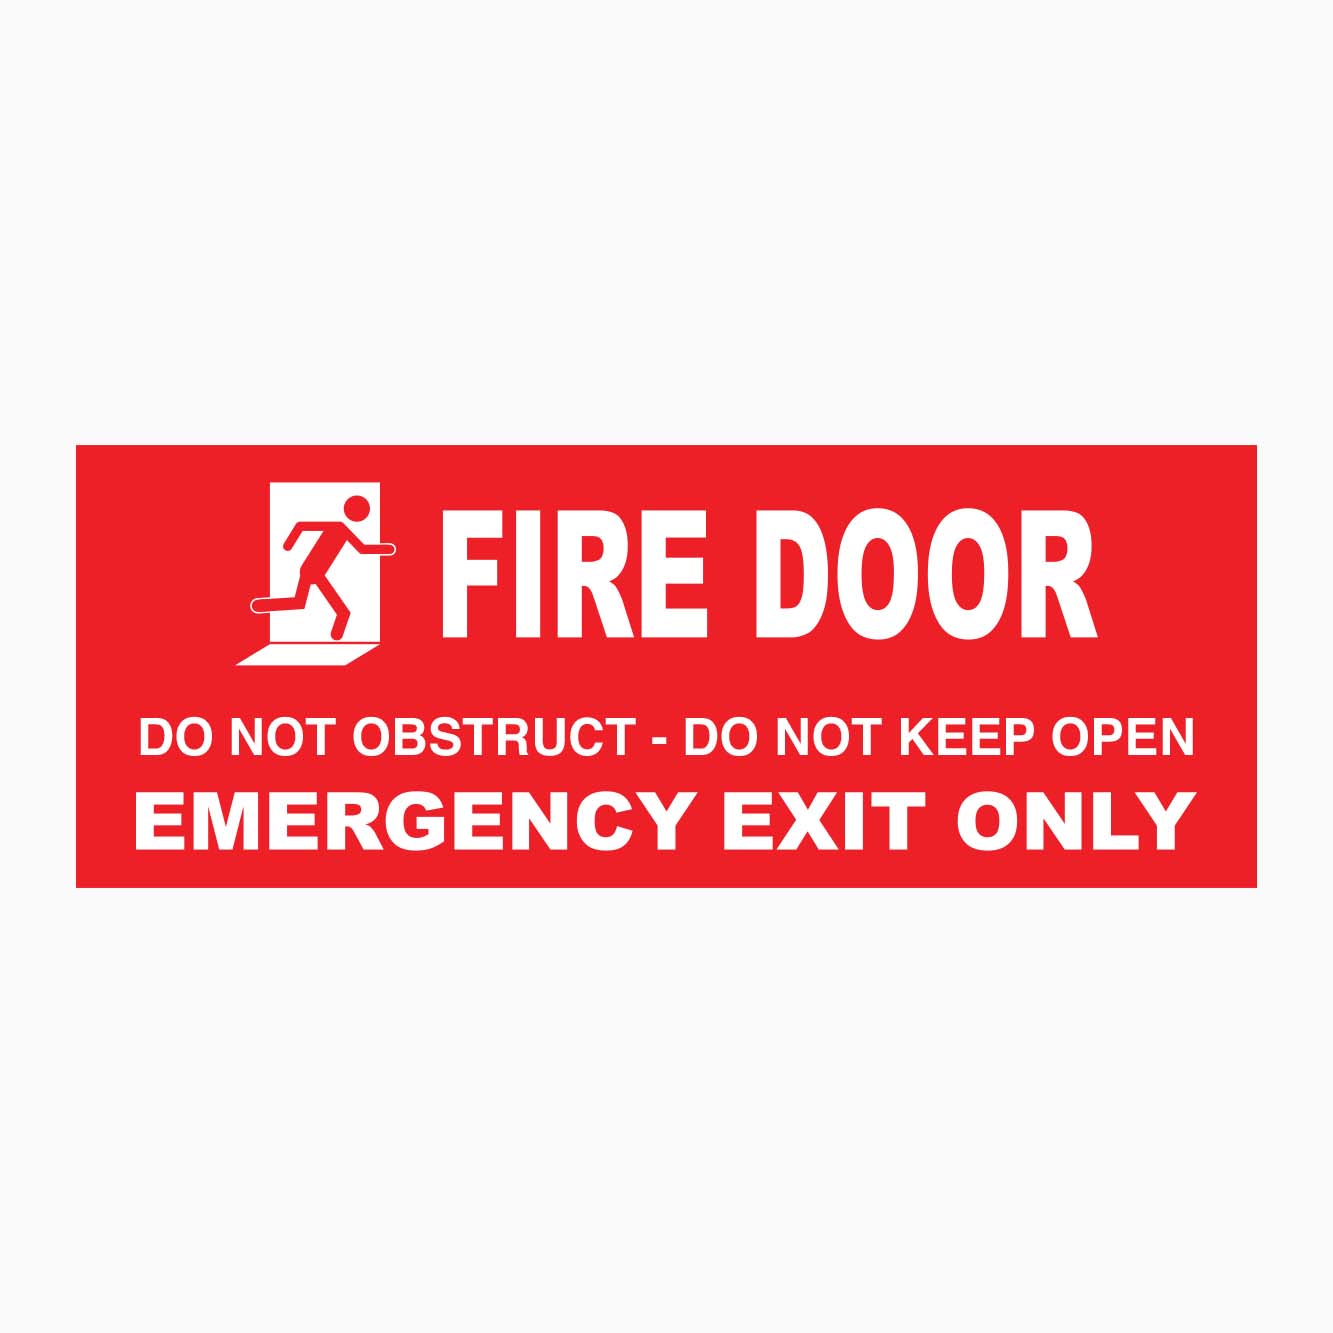 FIRE DOOR SIGN - DO NOT OBSTRUCT - DO NOT KEEP OPEN SIGN EMERGENCY EXIT ONLY SIGN